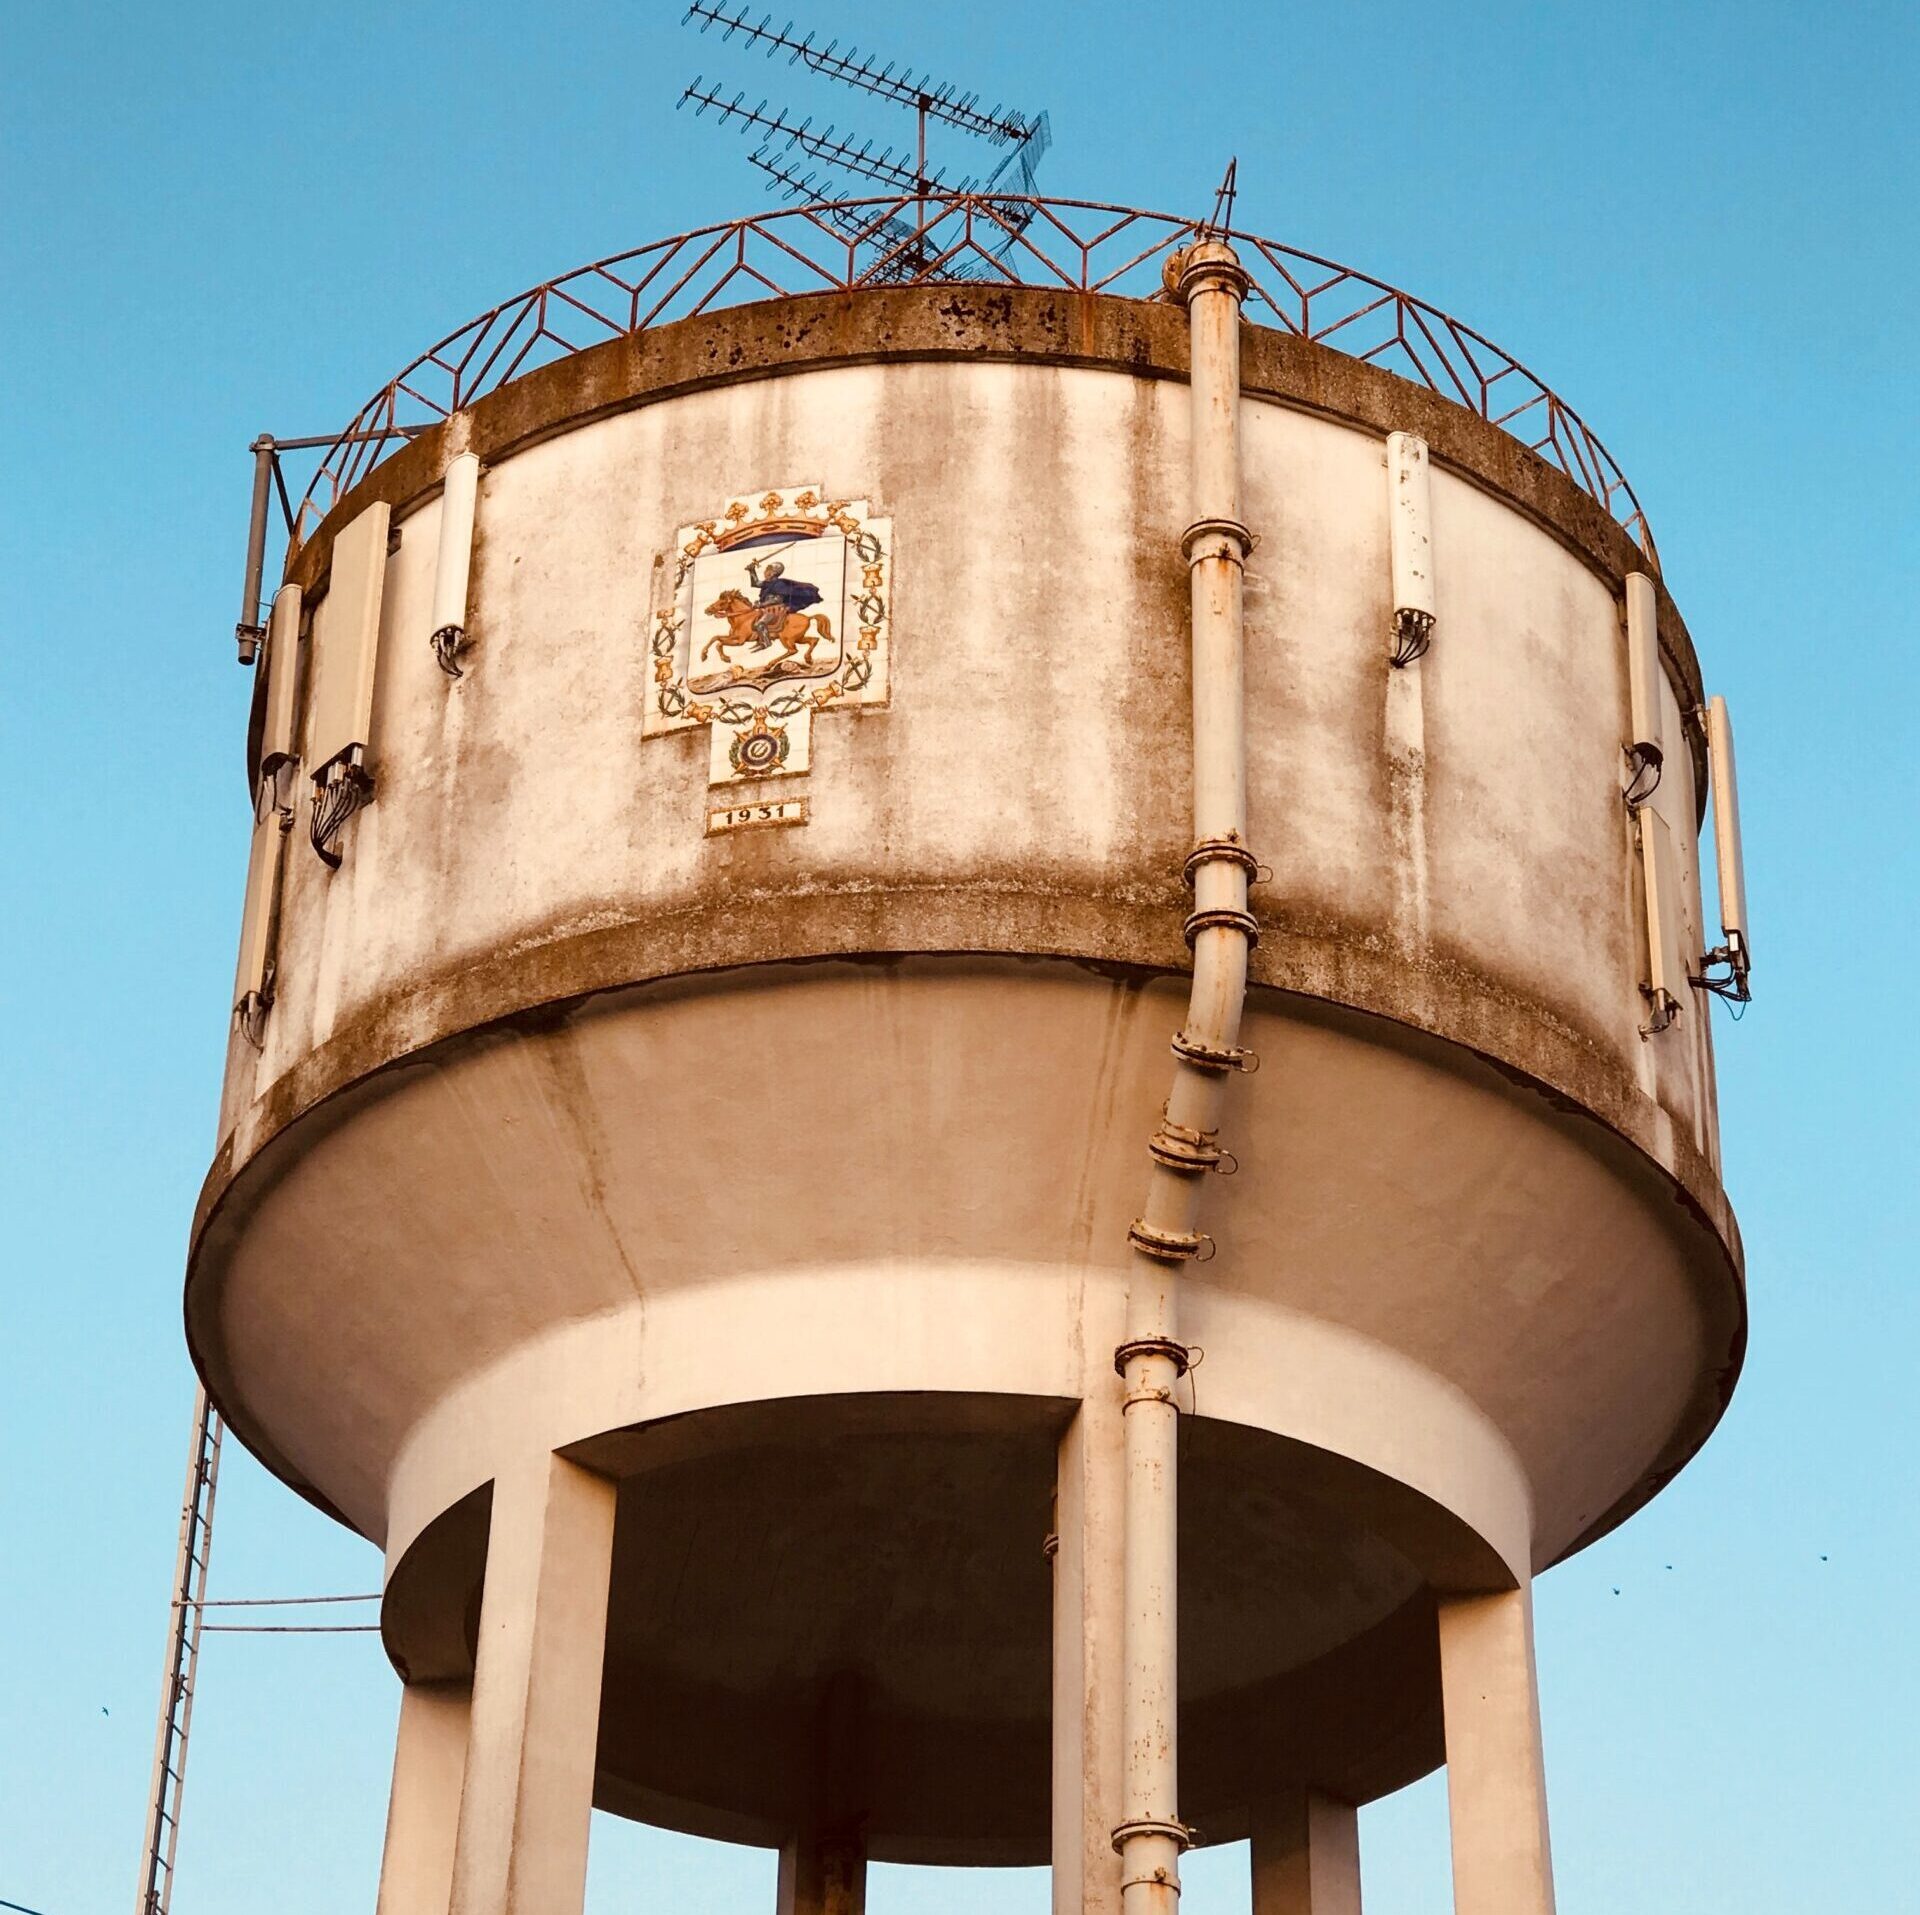 water tower water cycle